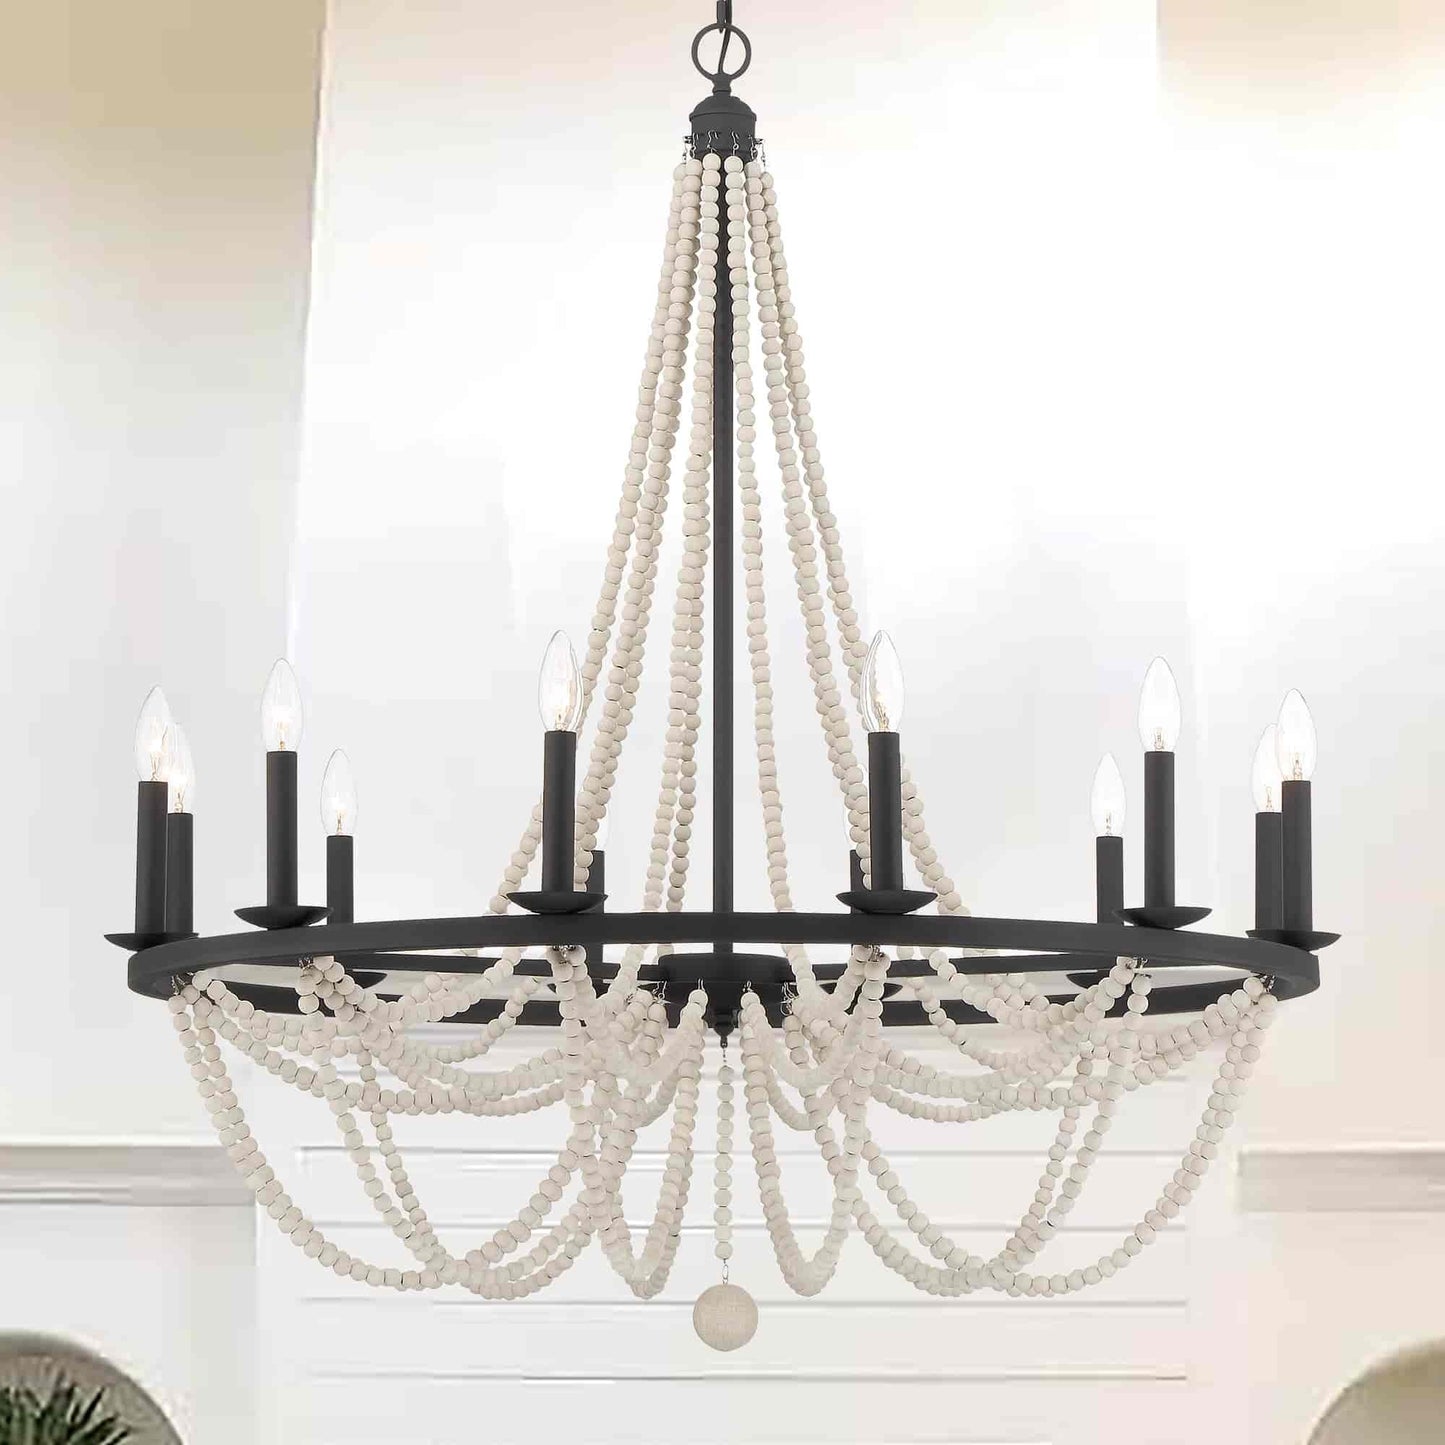 5812 | 12 - Light Wood Beaded Chandelier by ACROMA™  UL - ACROMA